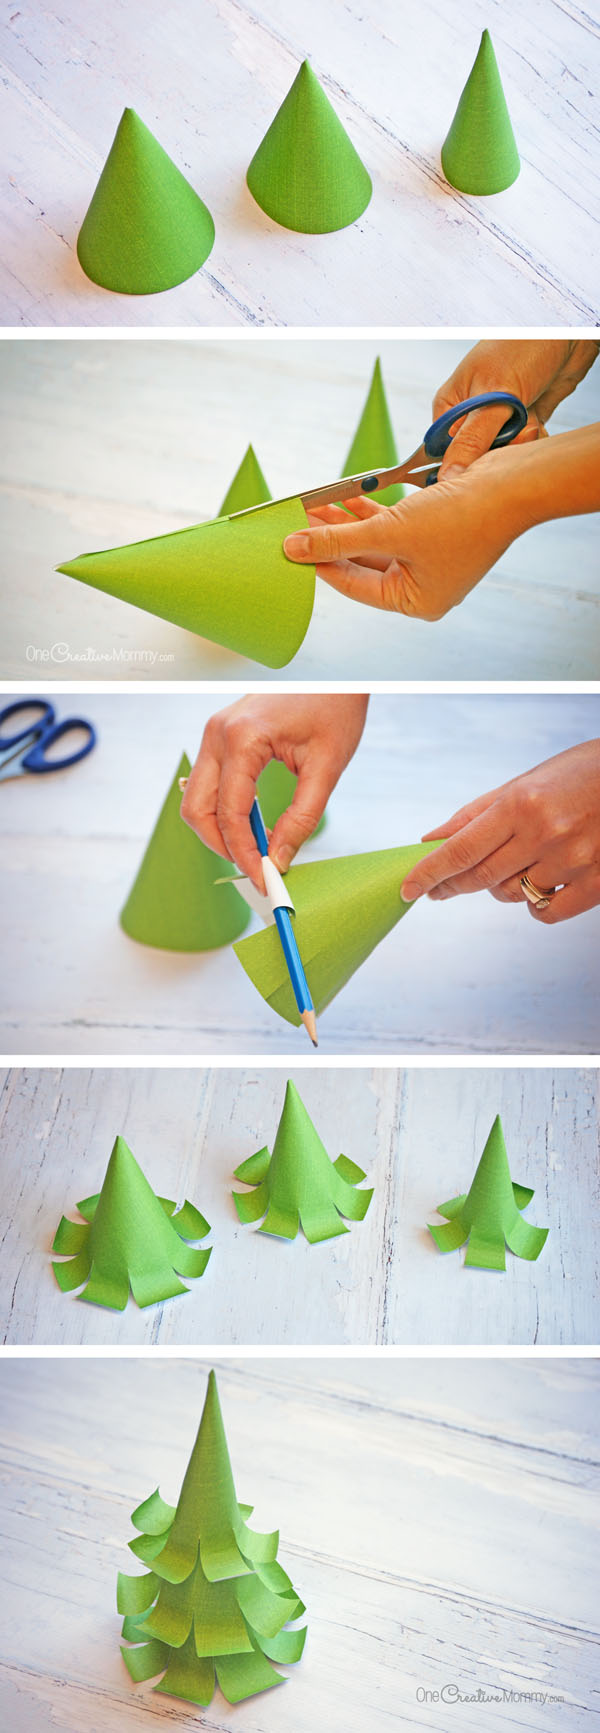 How to make a Paper Christmas Tree